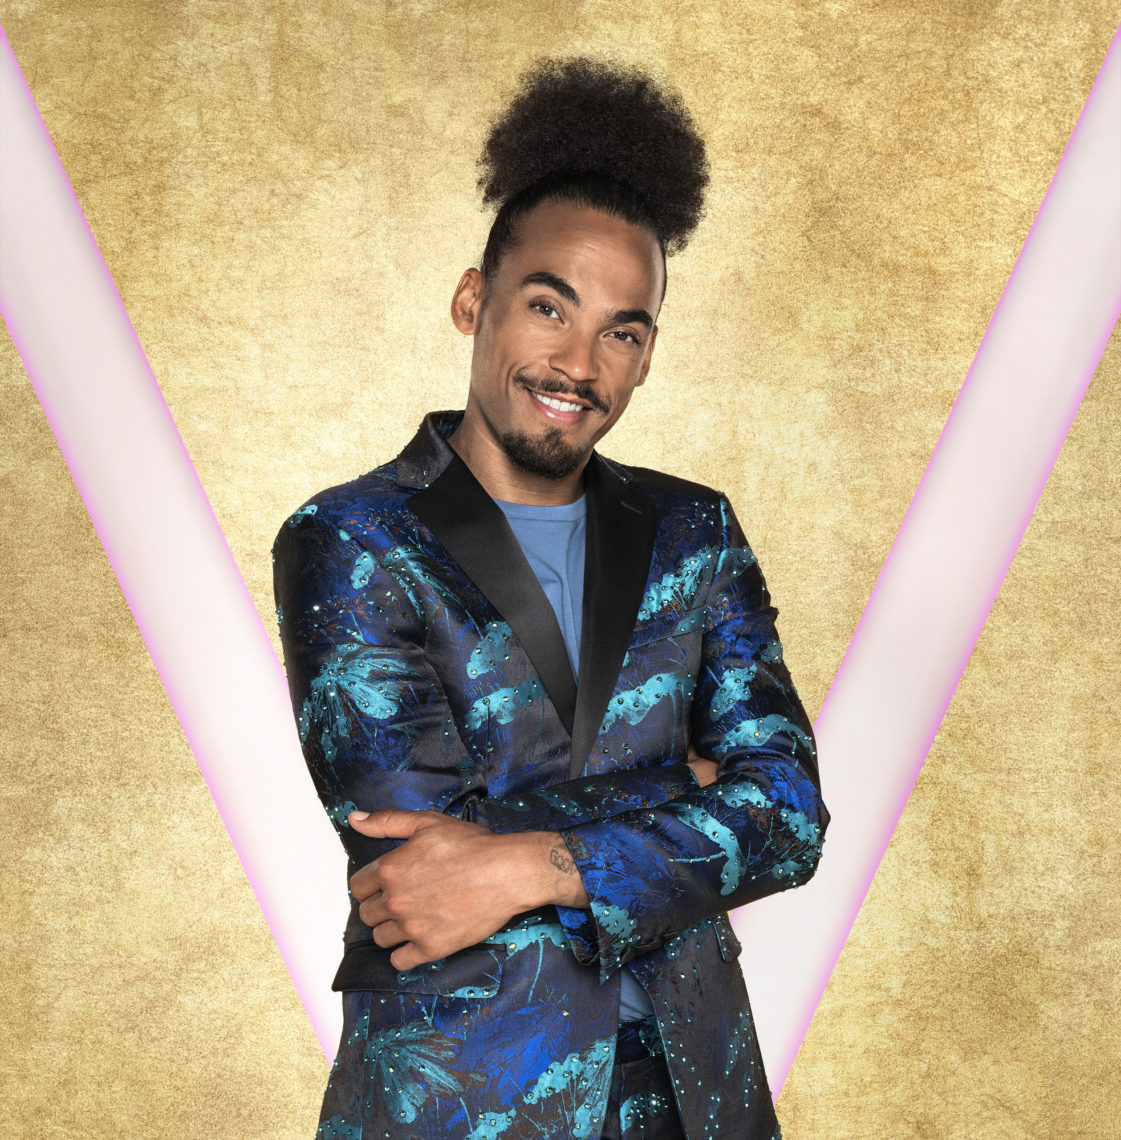 Strictly Come Dancing: How tall is Dev Griffin? Height, age and more!